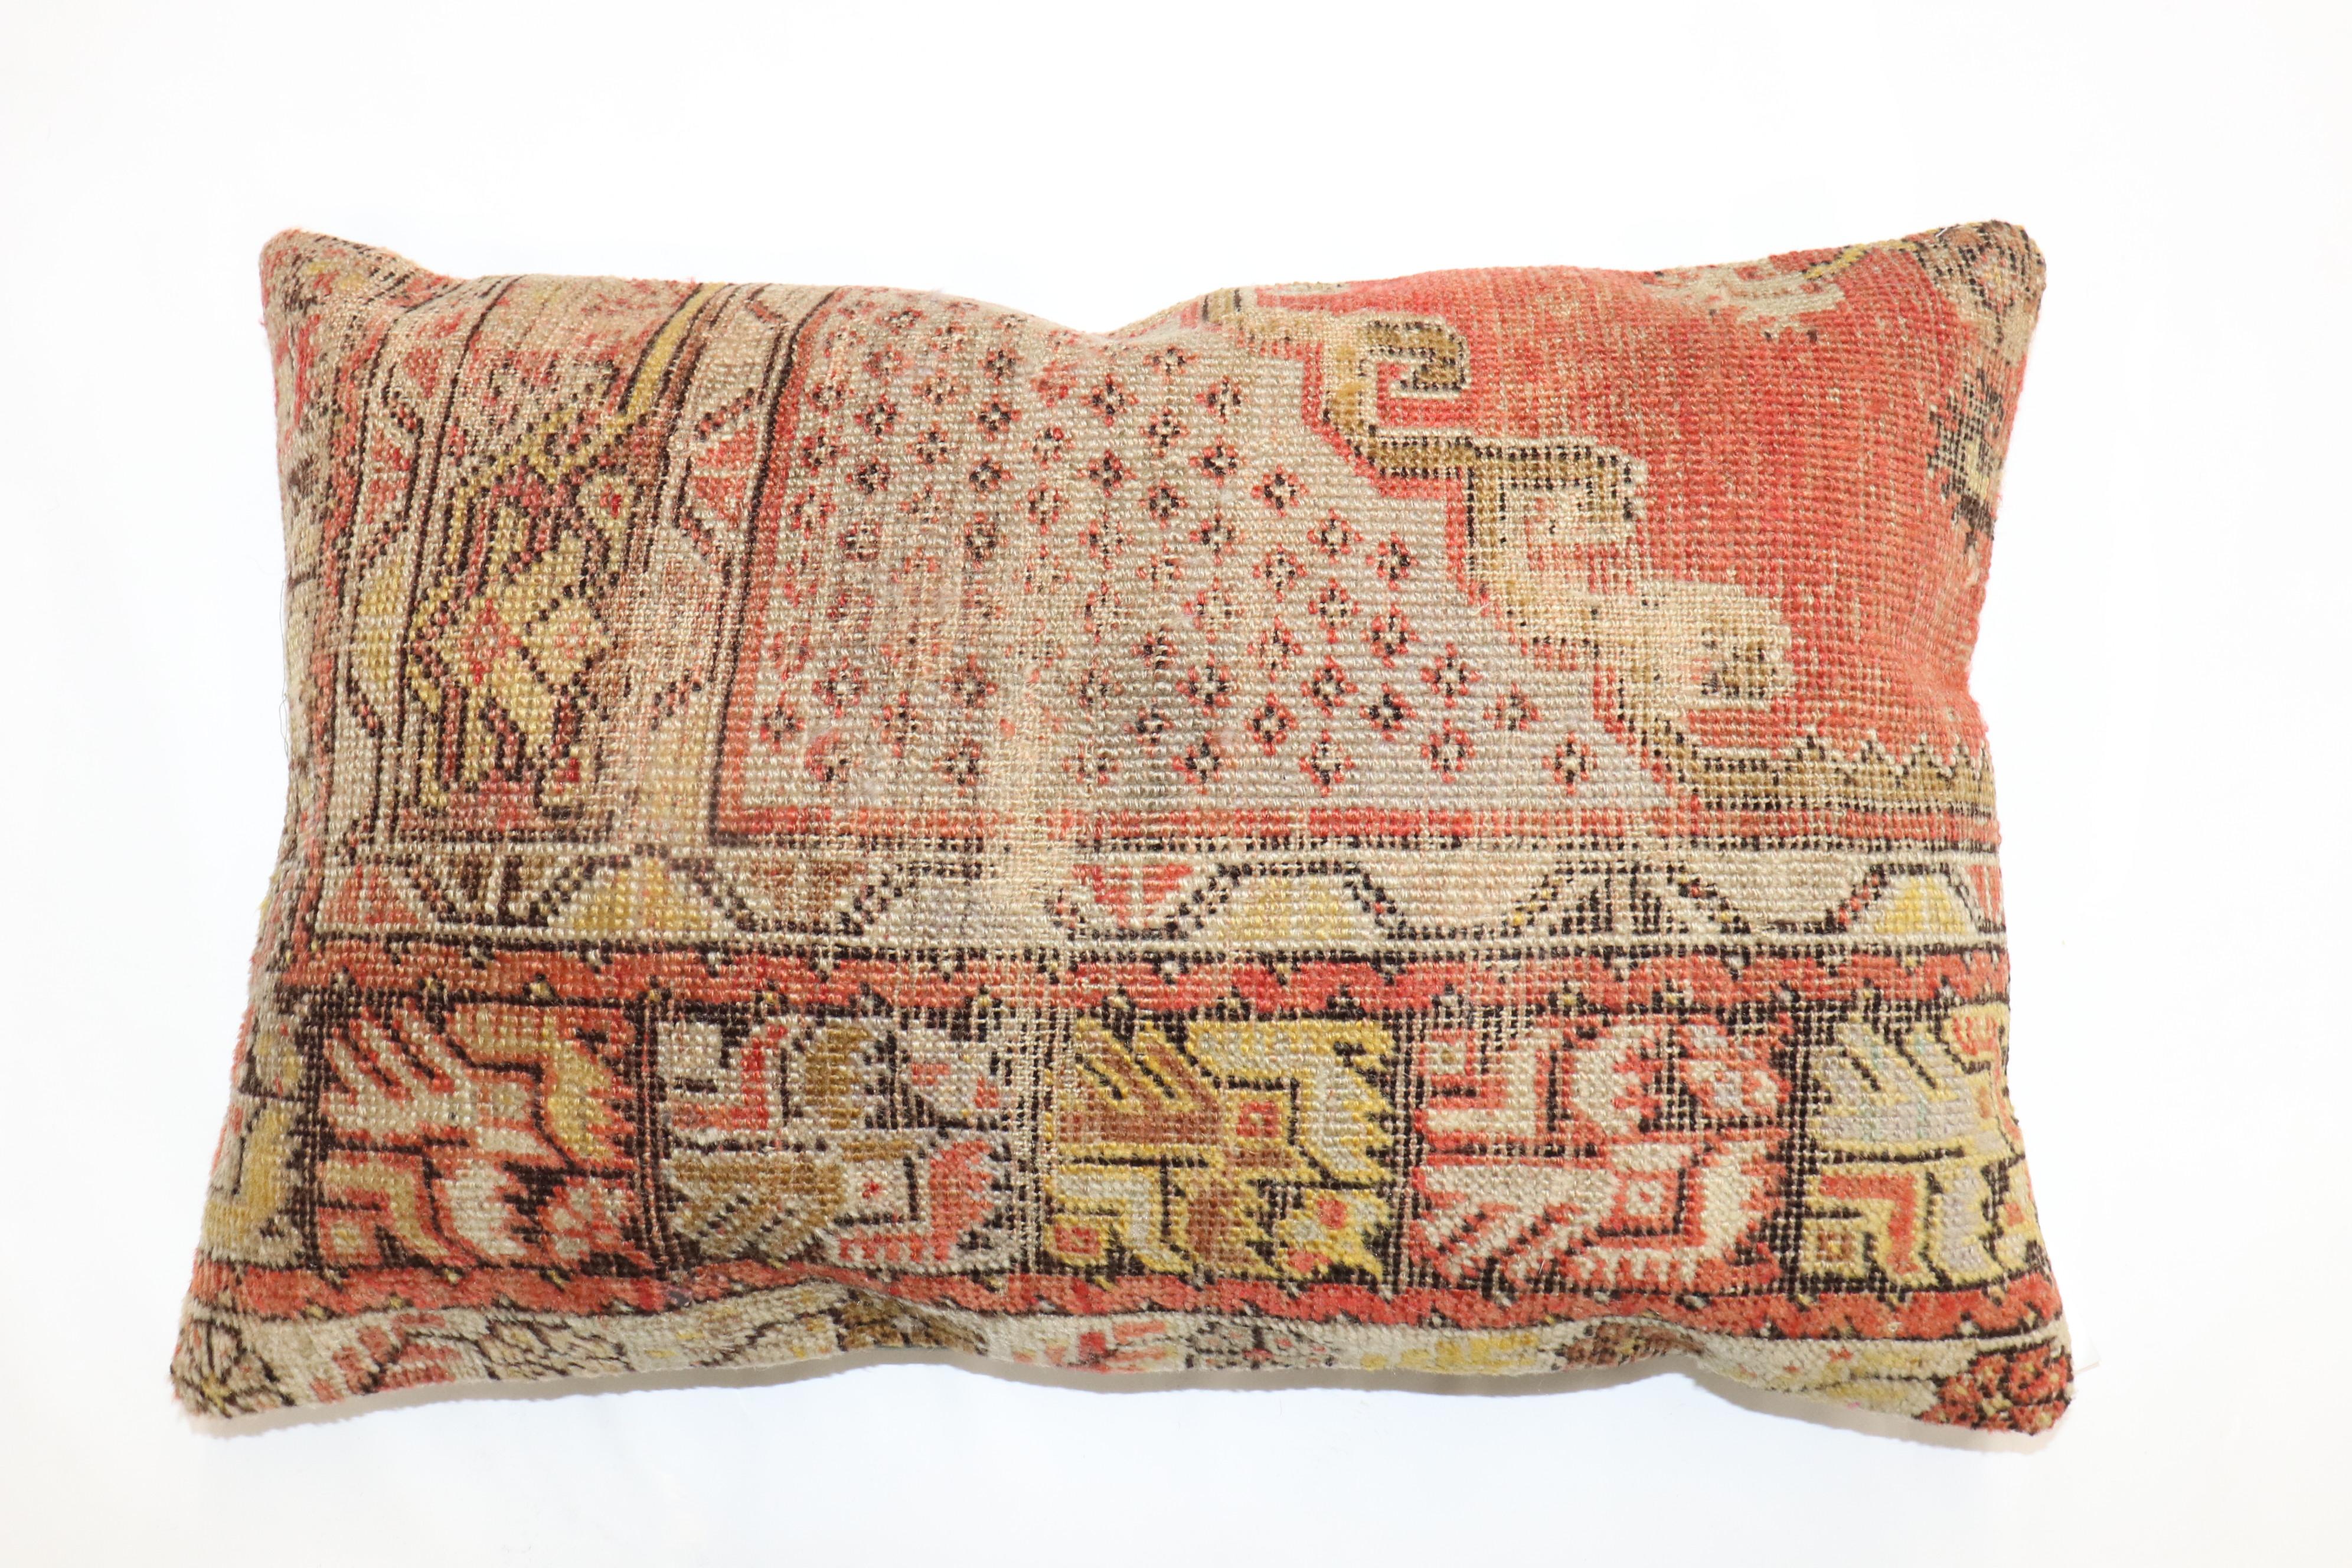 Pillow made from a turkish rug. Polyfill provided

Measures: 15'' x 23''.